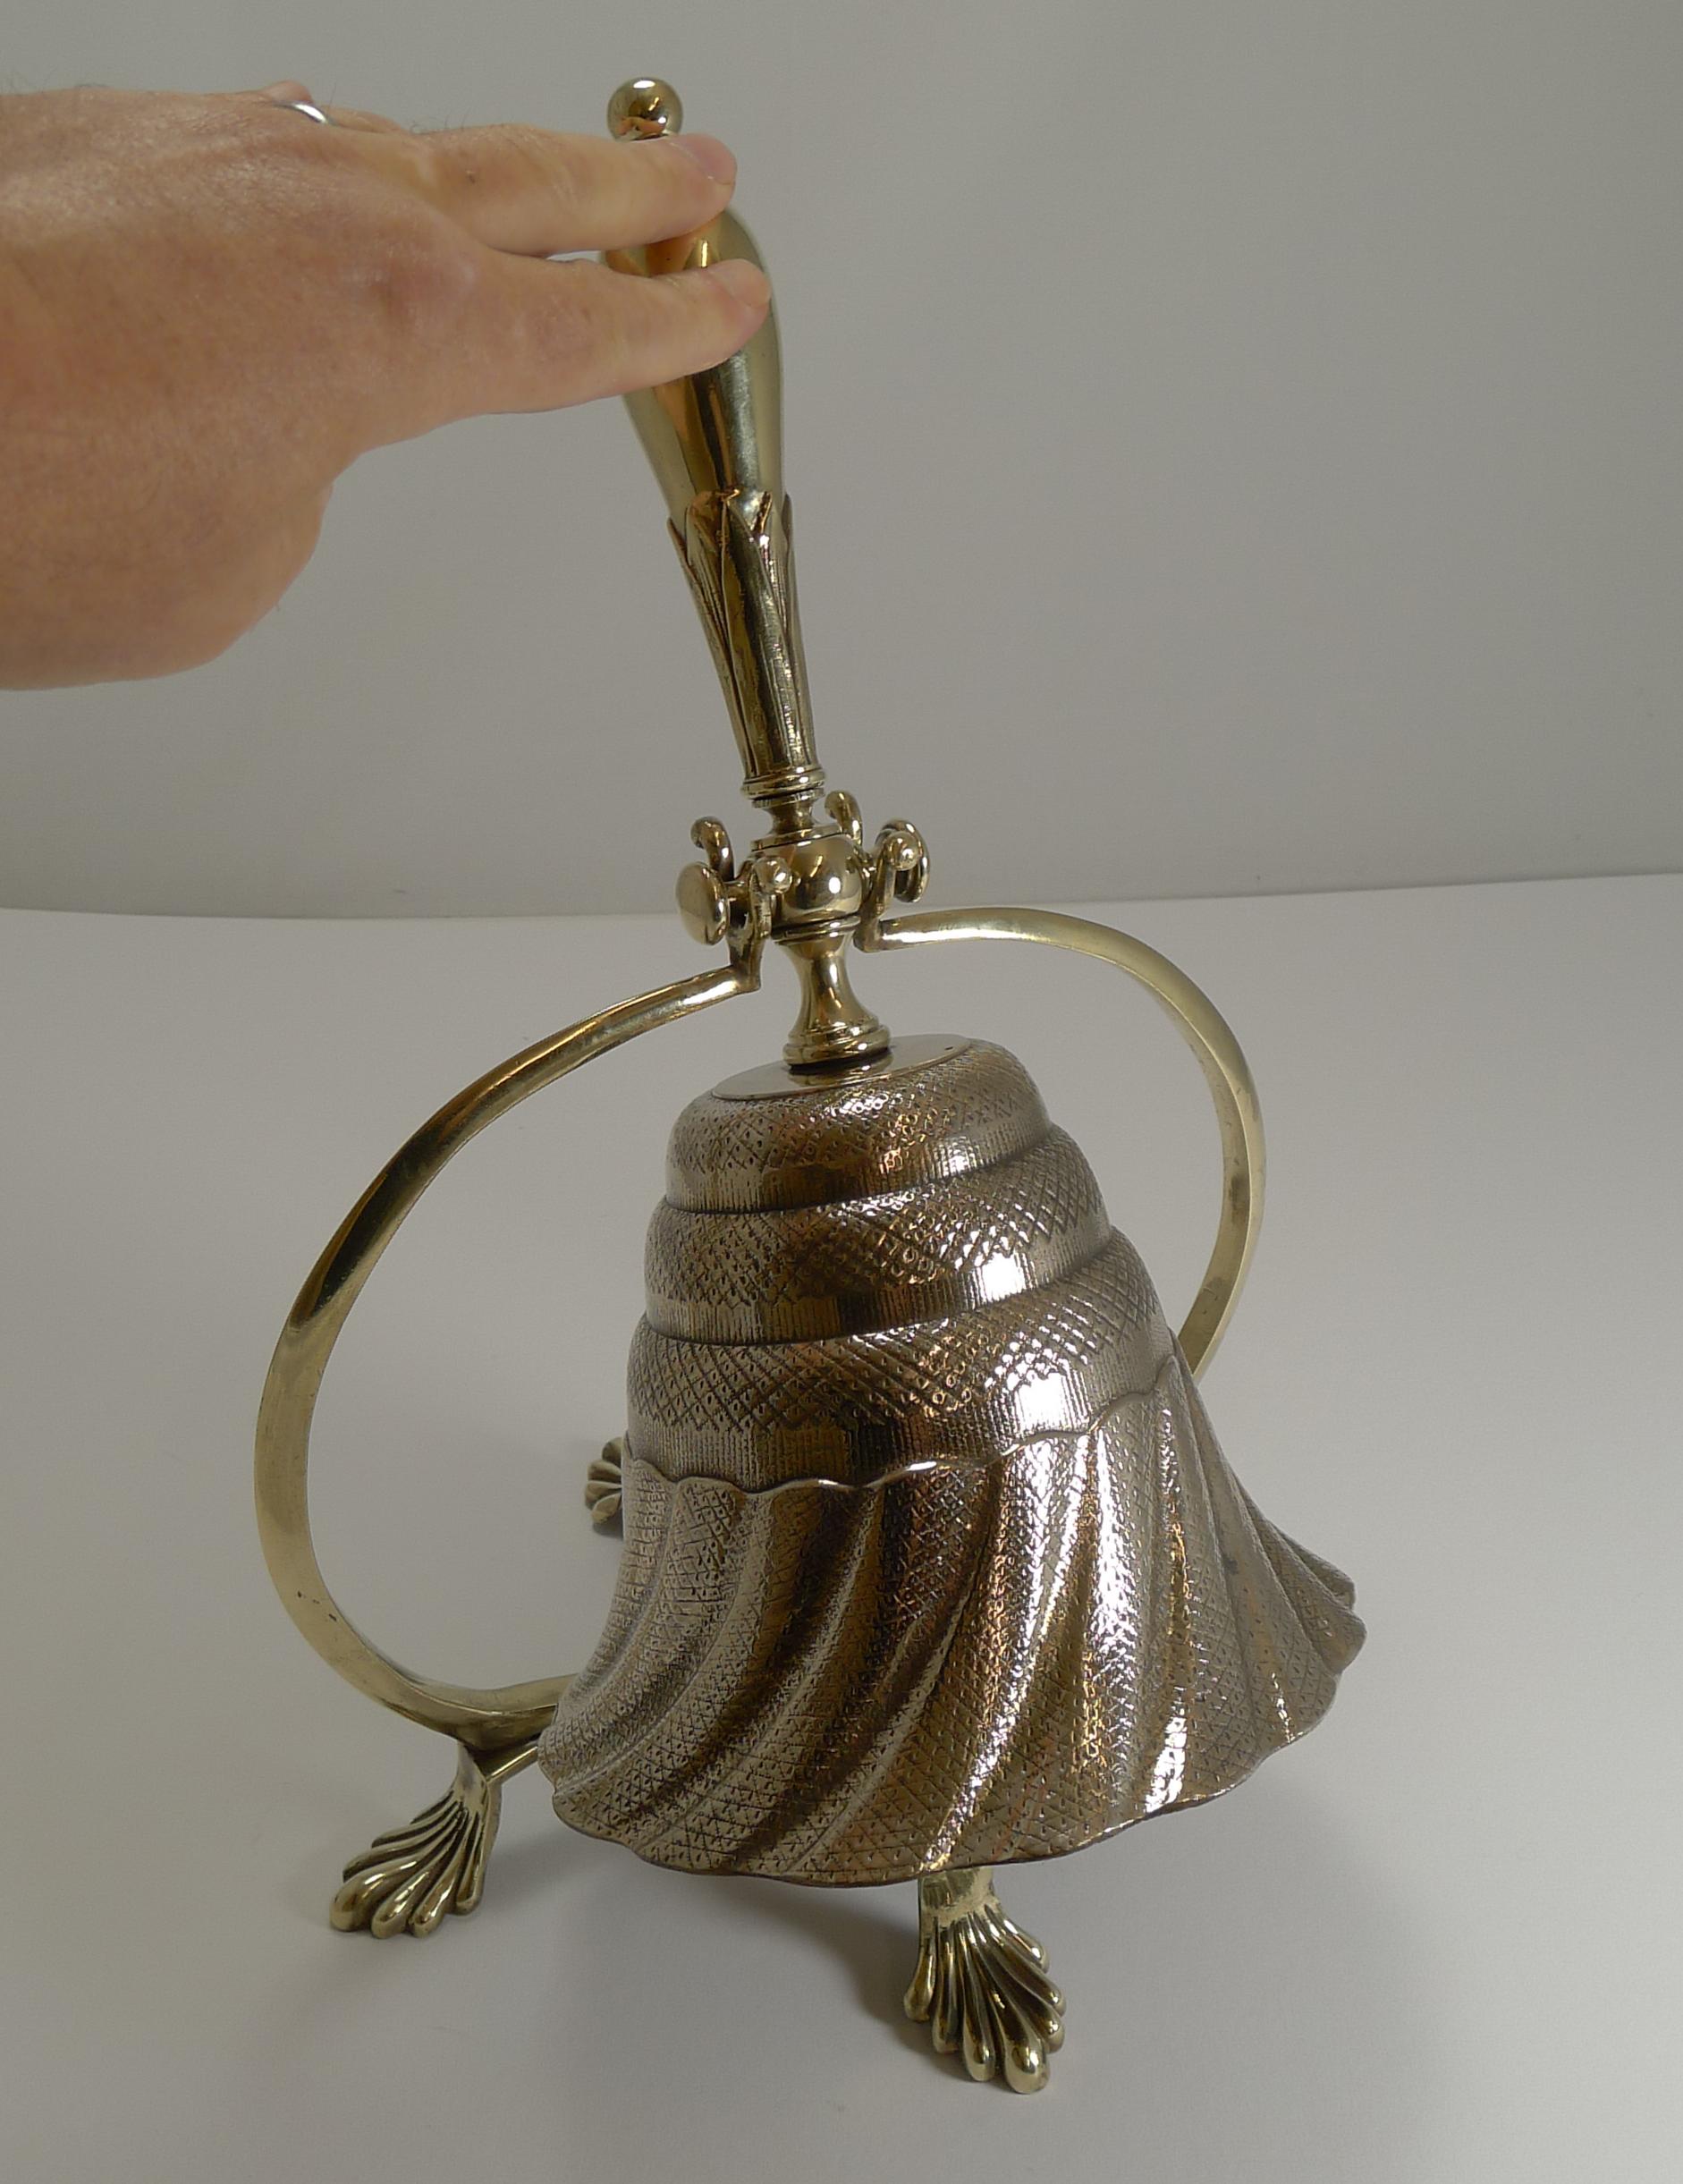 I have never seen anything quite like this before, a beautifully cast dinner bell to be used either in it's stand or hand-rung once removed from the stand.

Beautifully engineered, the stand and handle are made from a traditional brass and the